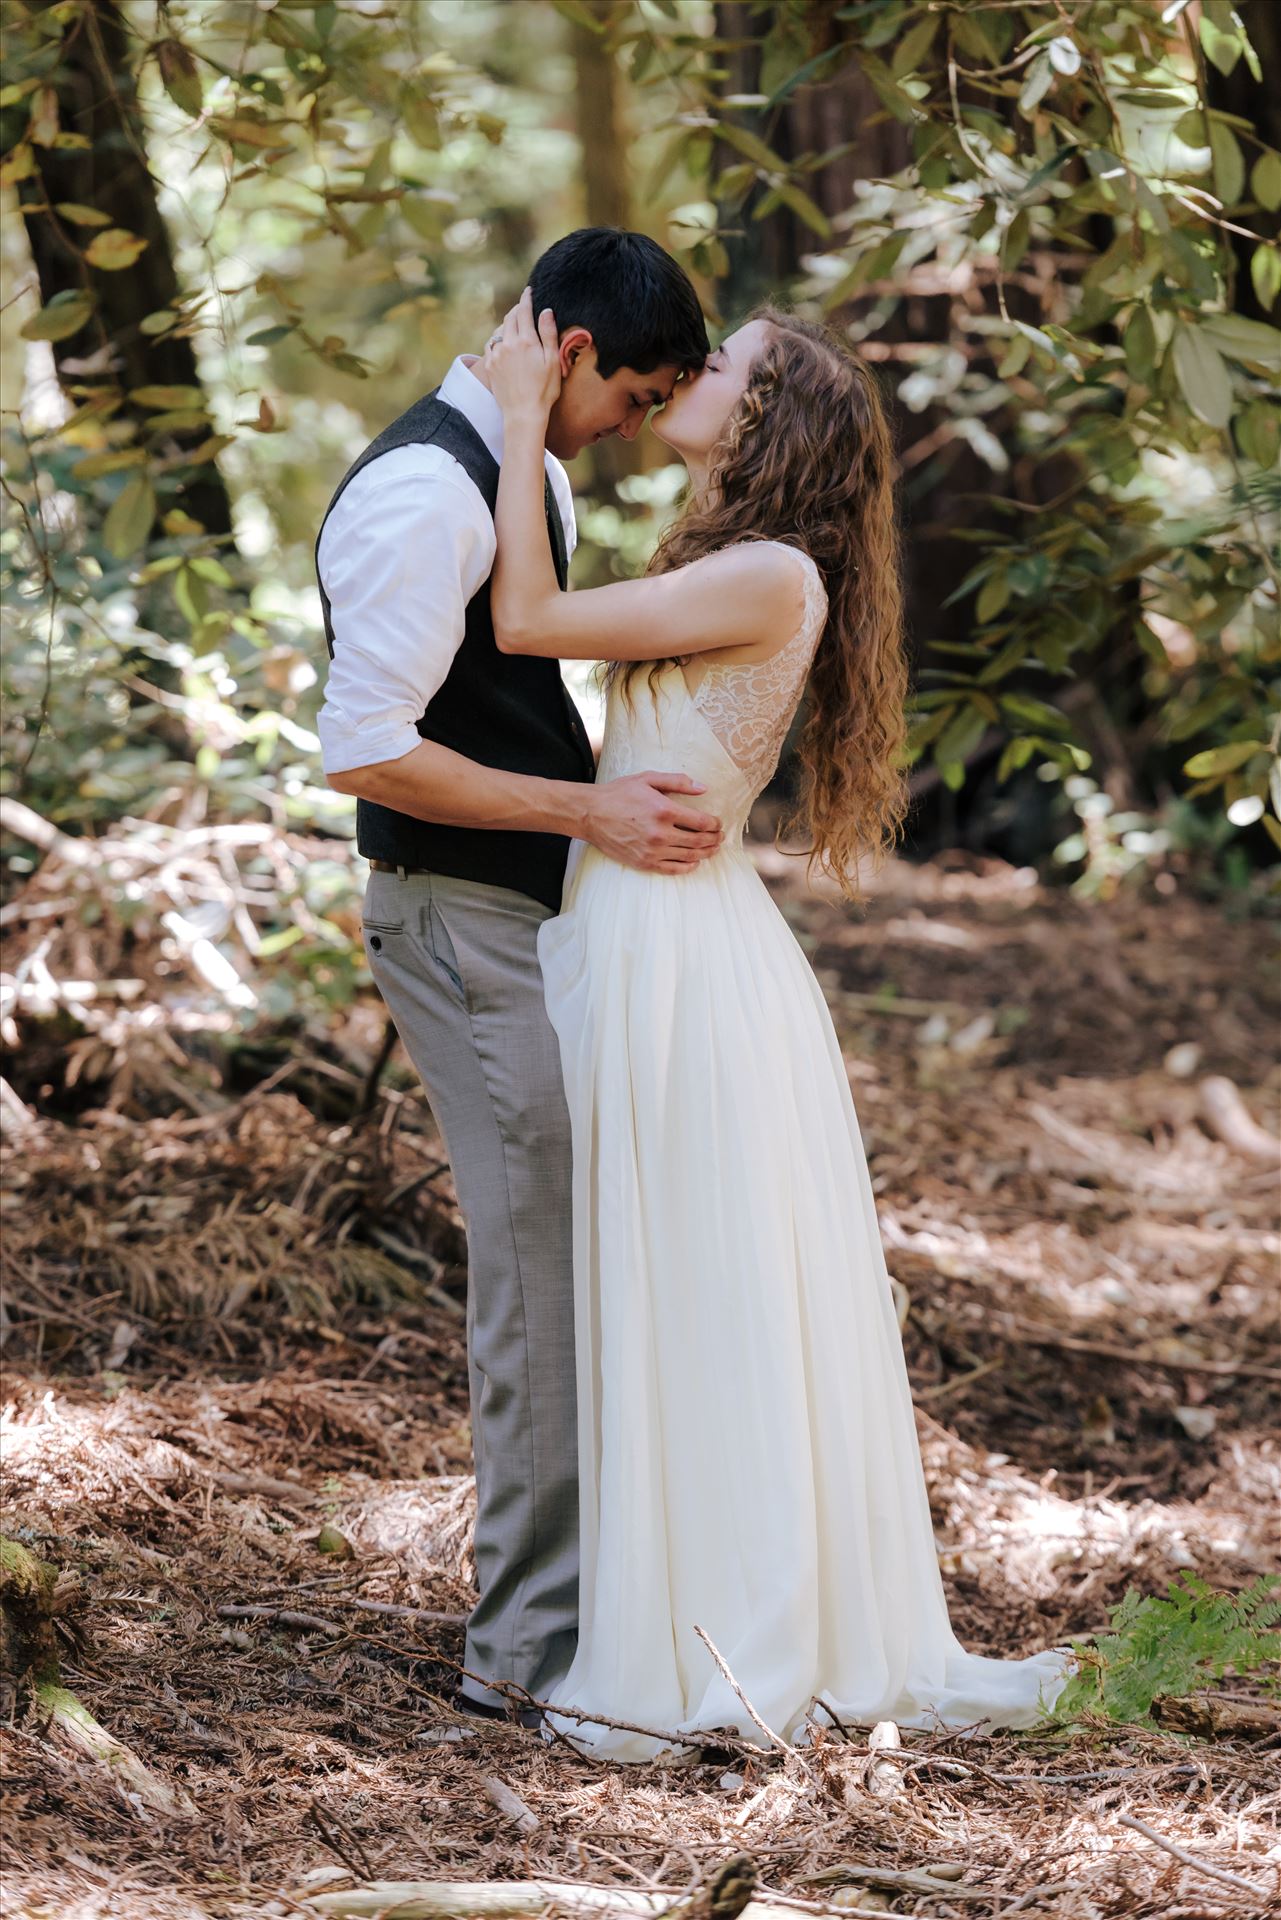 FW-6044.JPG Mt Madonna wedding in the redwoods outside of Watsonville, California with a romantic and classic vibe by sarah williams of mirror's edge photography a san luis obispo wedding photographer.  Bride kisses groom in the trees by Sarah Williams